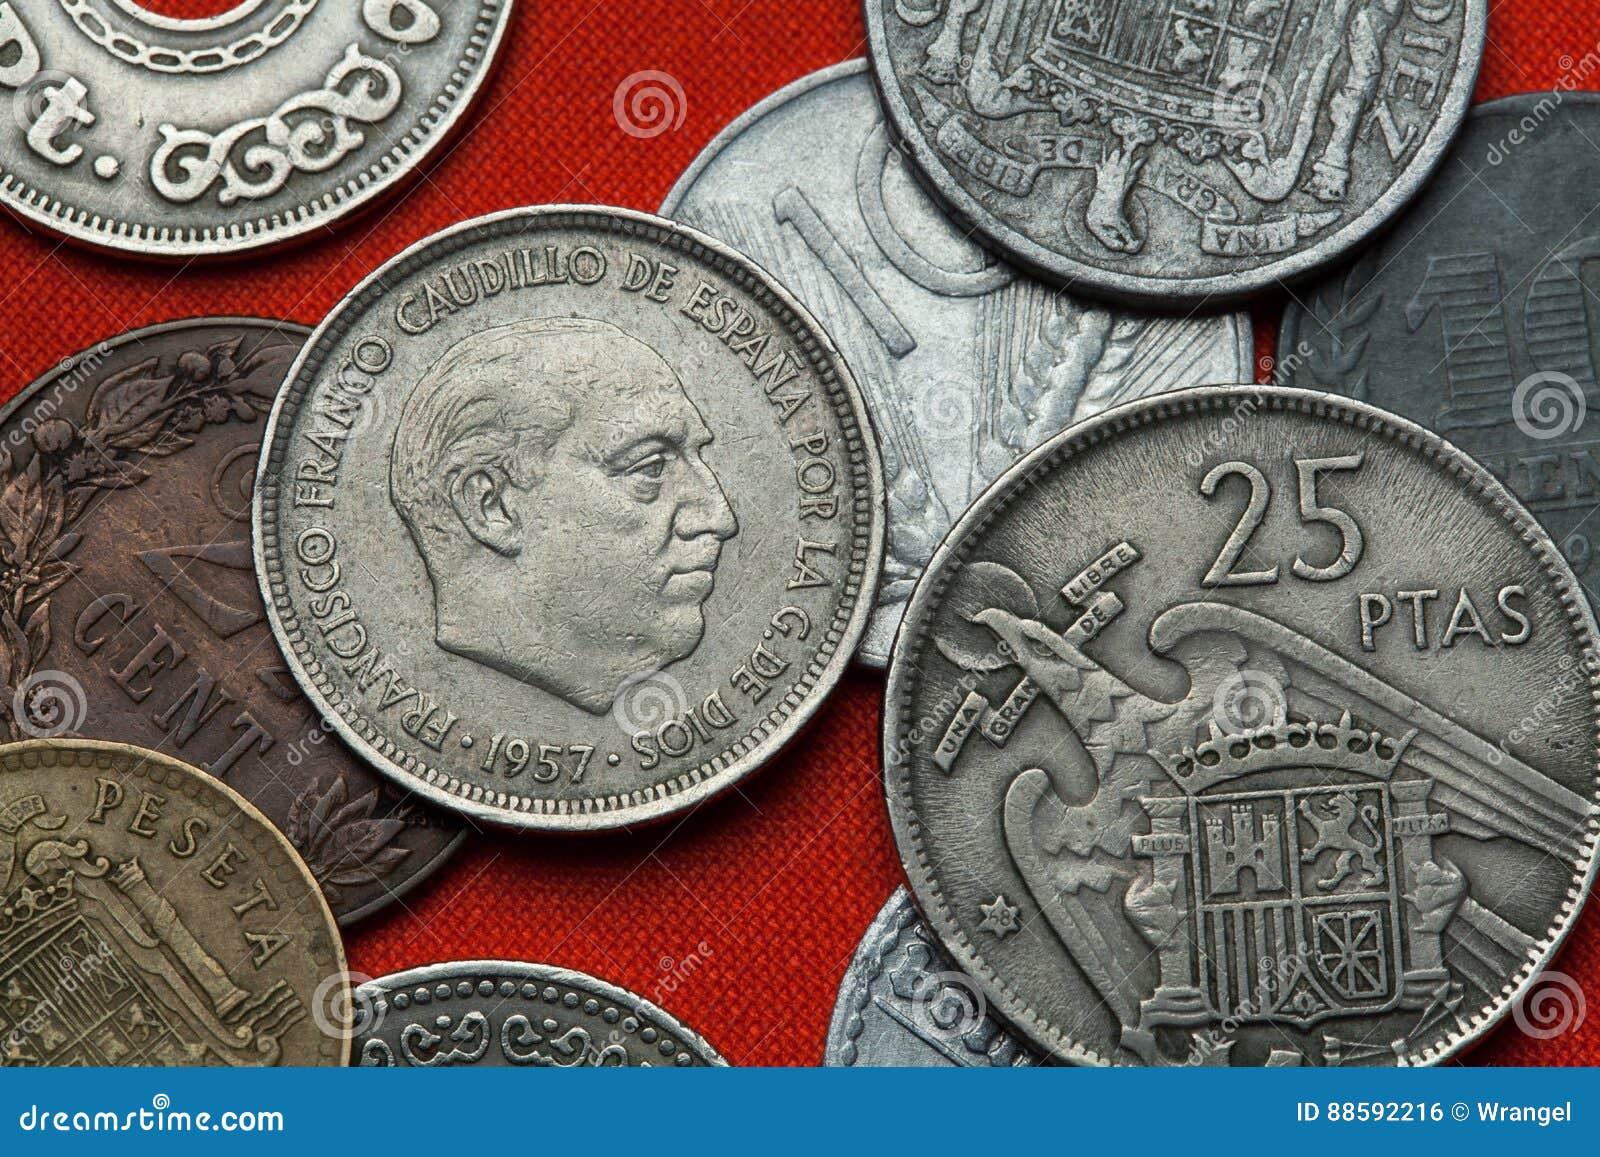 coins of spain. spanish dictator francisco franco